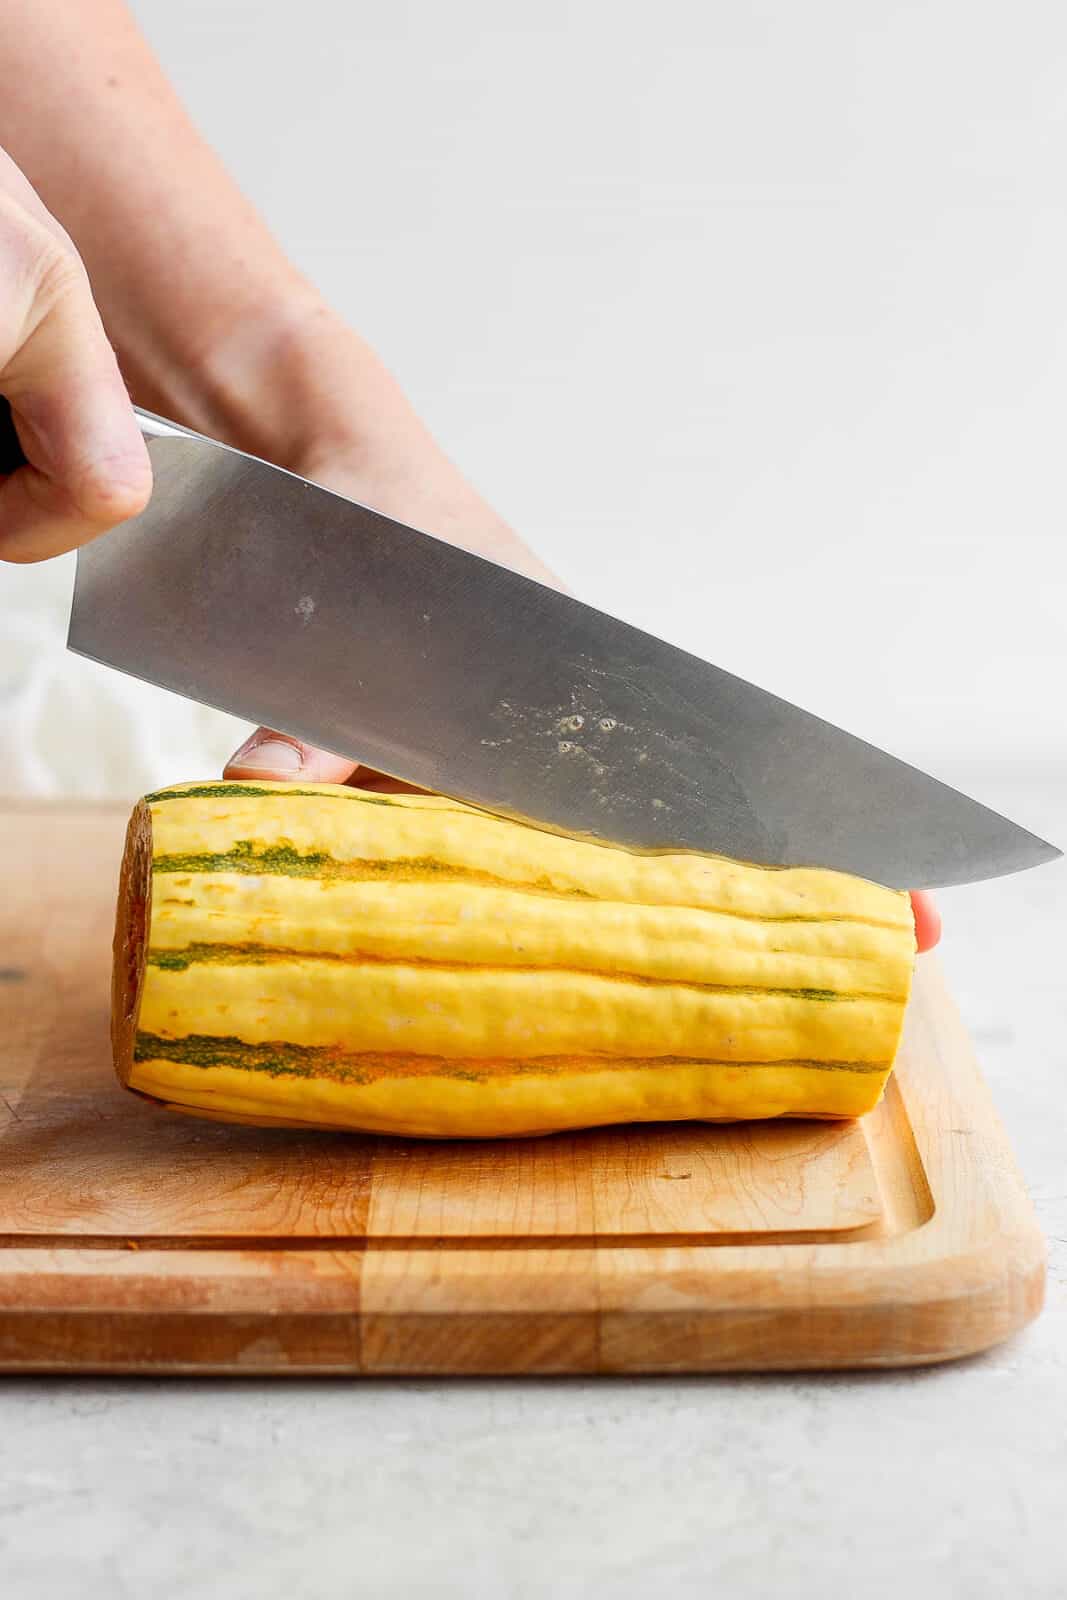 A knife cutting a delicate squash in half, length-wise.